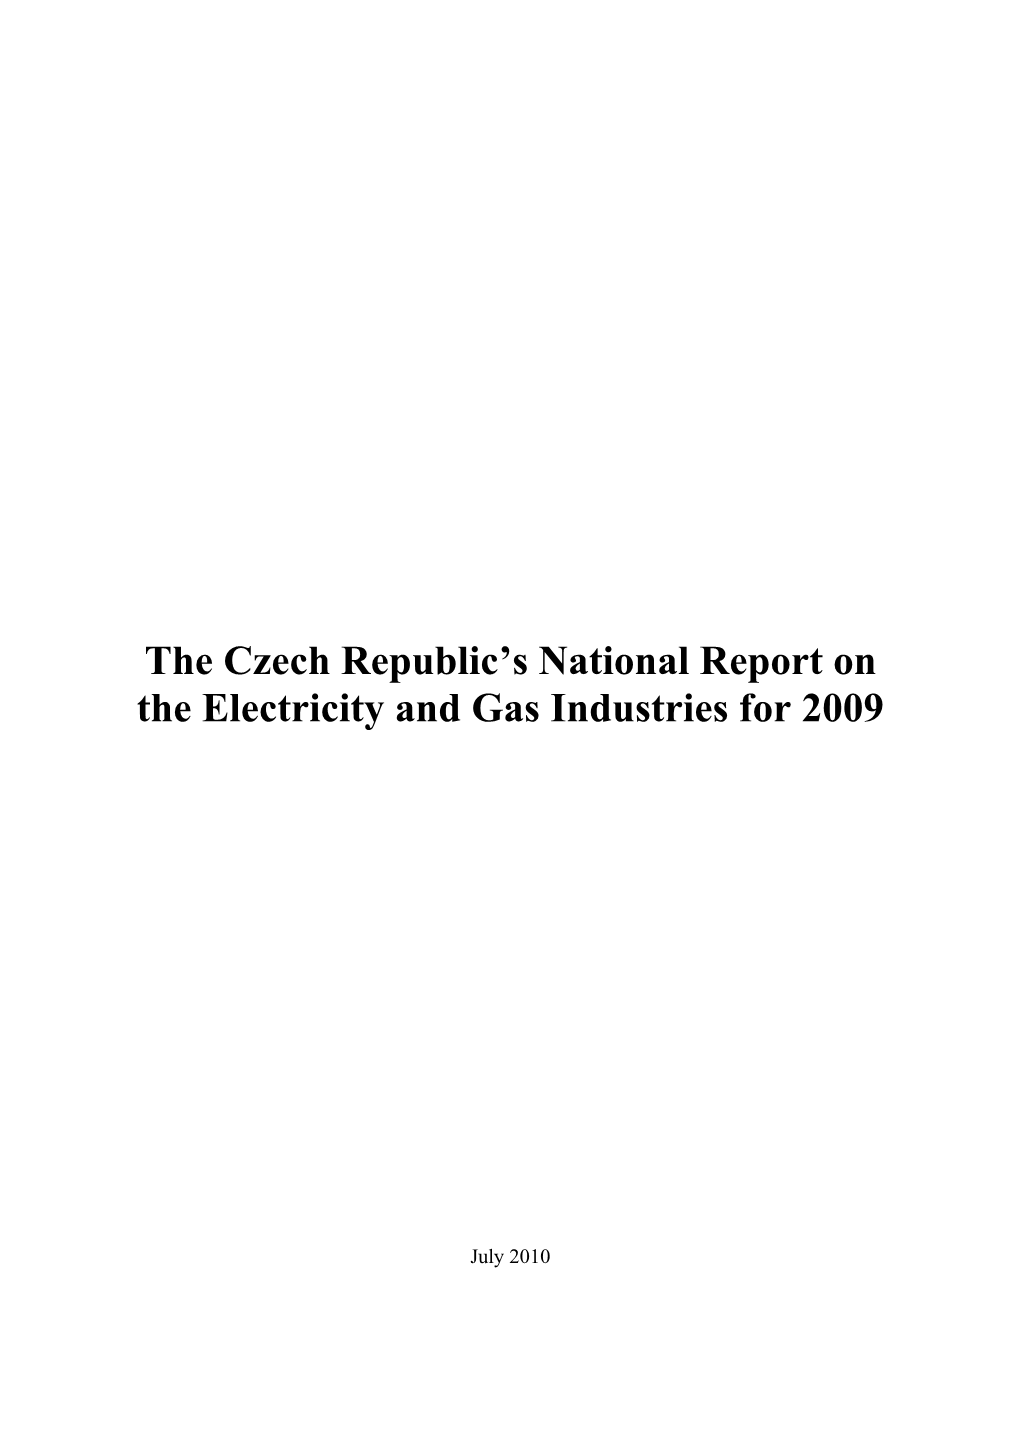 The Czech Republic's National Report on the Electricity and Gas